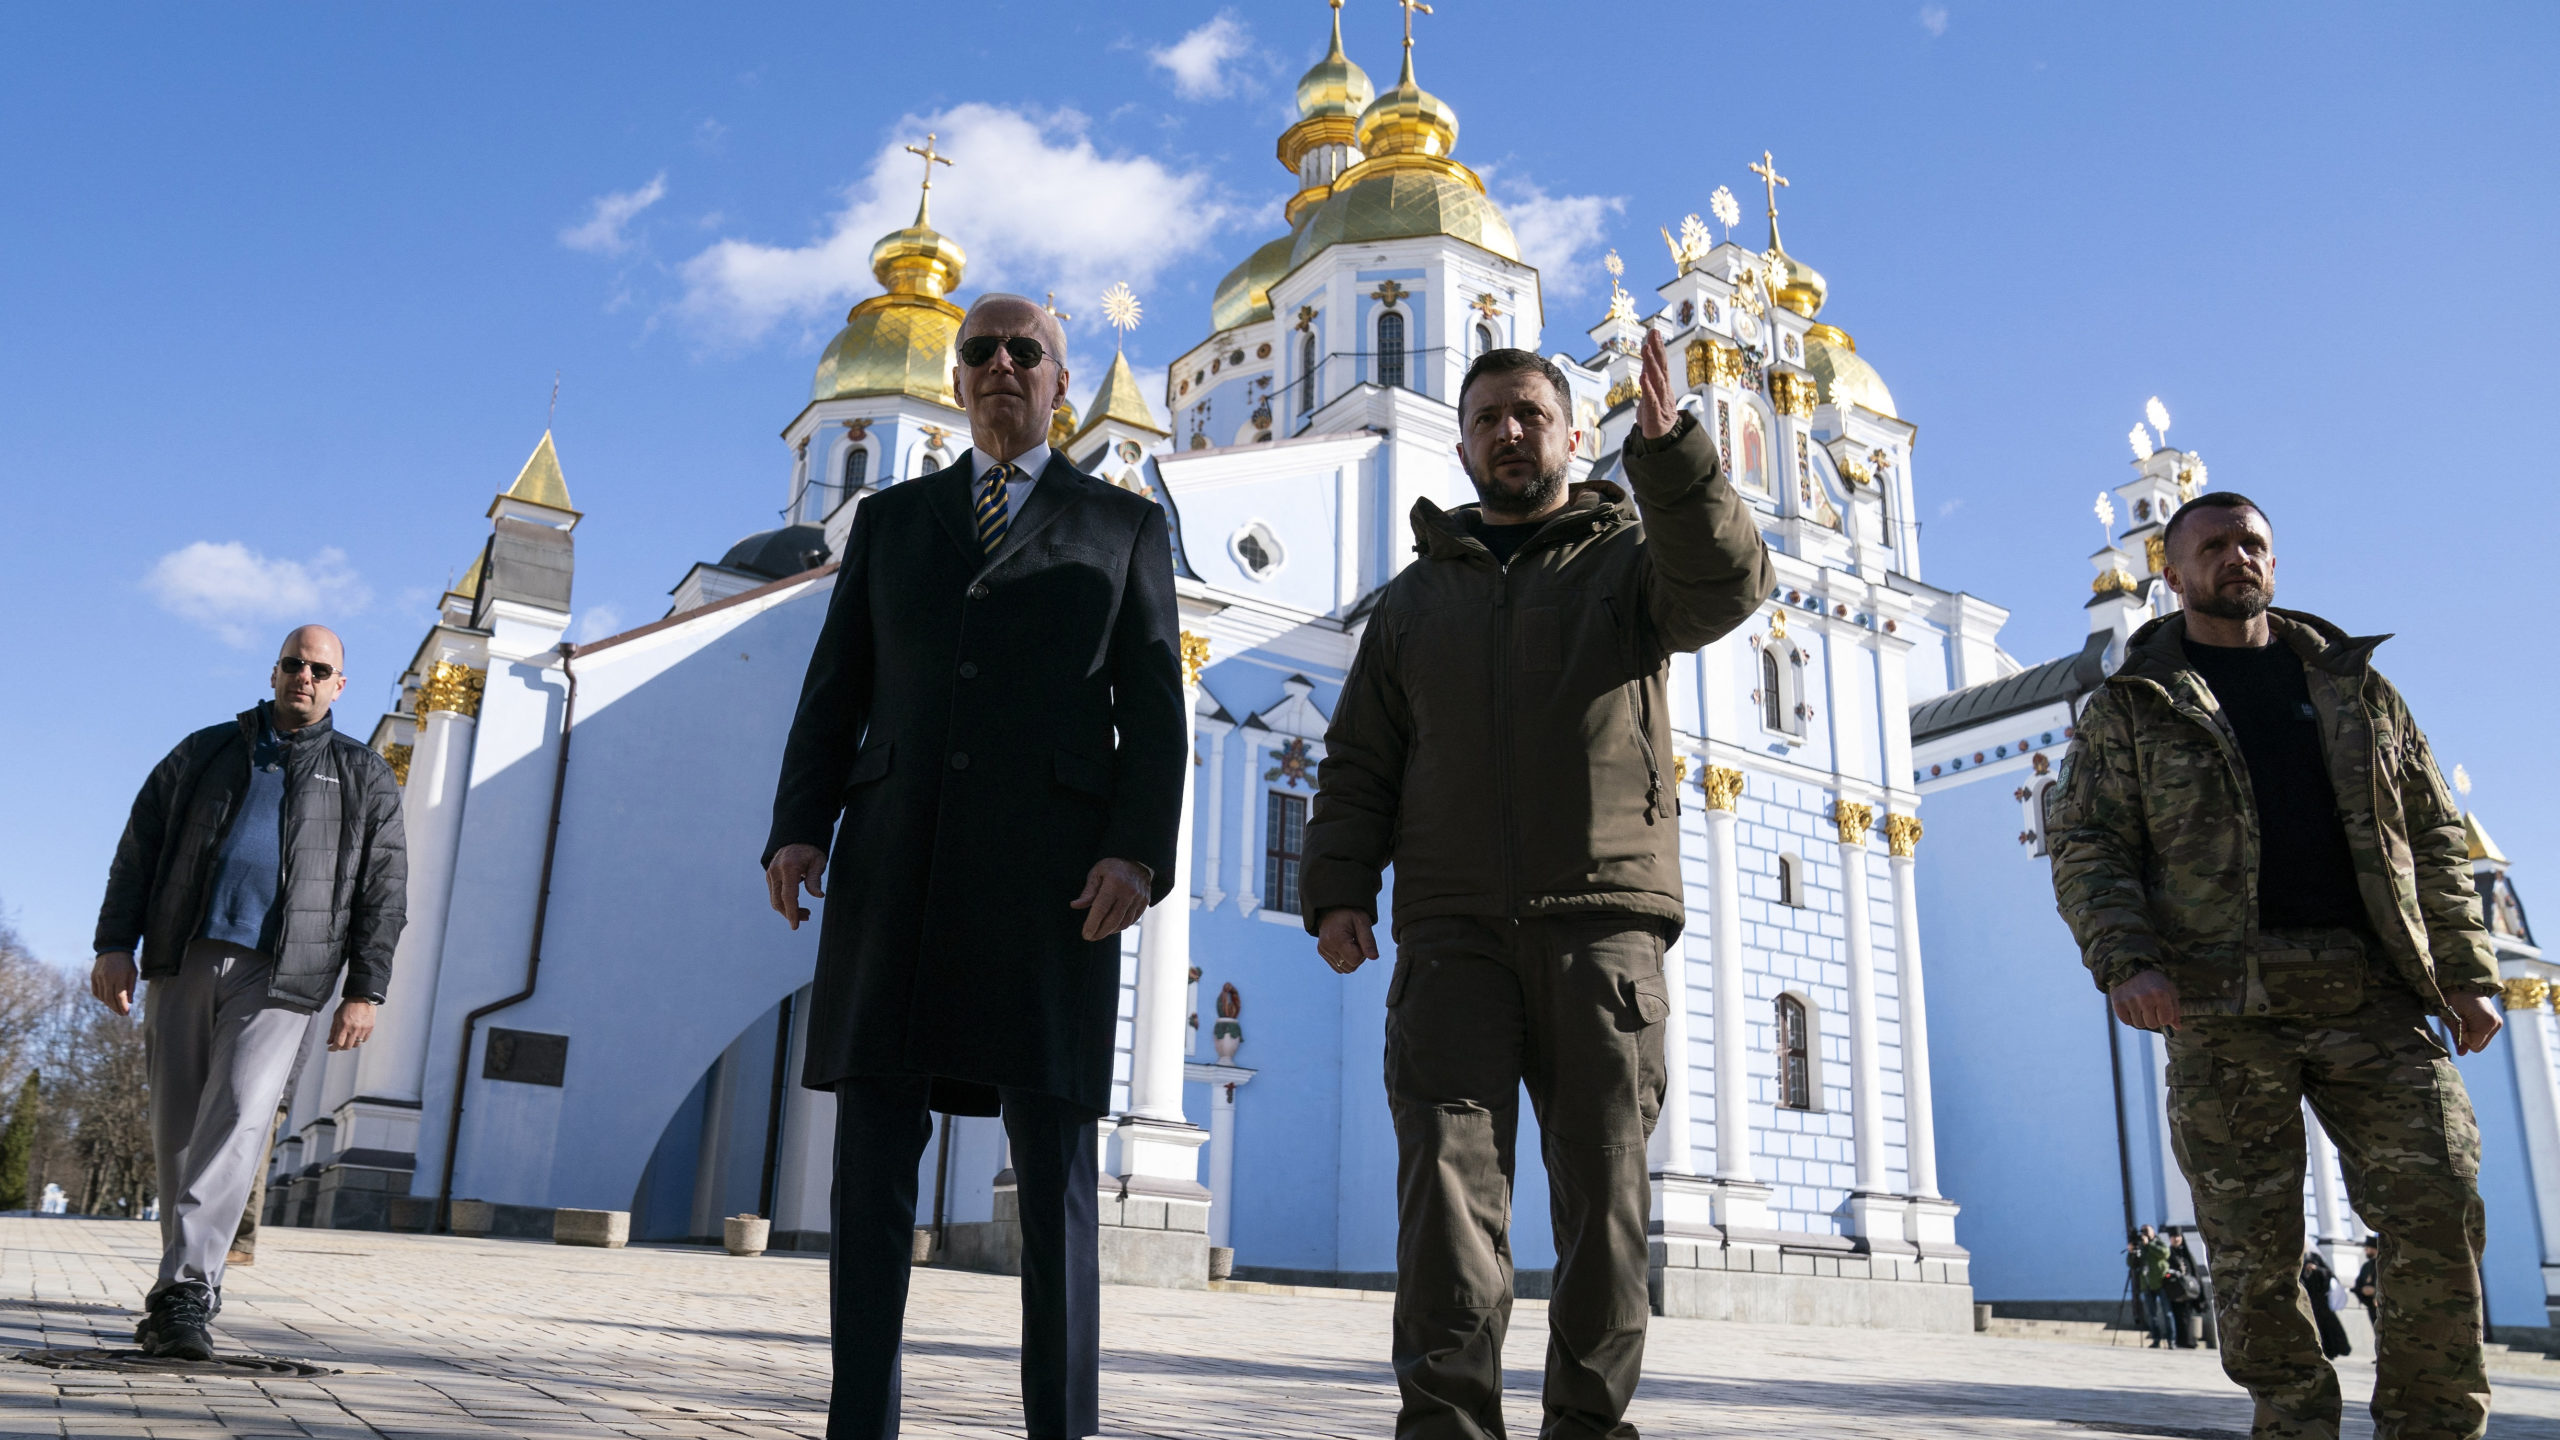 US President Joe Biden (C-L) walks with Ukrainian President Volodymyr Zelensky (C-R) at St. Michael’s Golden-Domed Cathedral during an unannounced visit, in Kyiv on February 20, 2023. – US President Joe Biden promised increased arms deliveries for Ukraine during a surprise visit to Kyiv on February 20, 2023, in which he also vowed Washington’s «unflagging commitment» in defending Ukraine’s territorial integrity. (Photo by Evan Vucci / POOL / AFP)